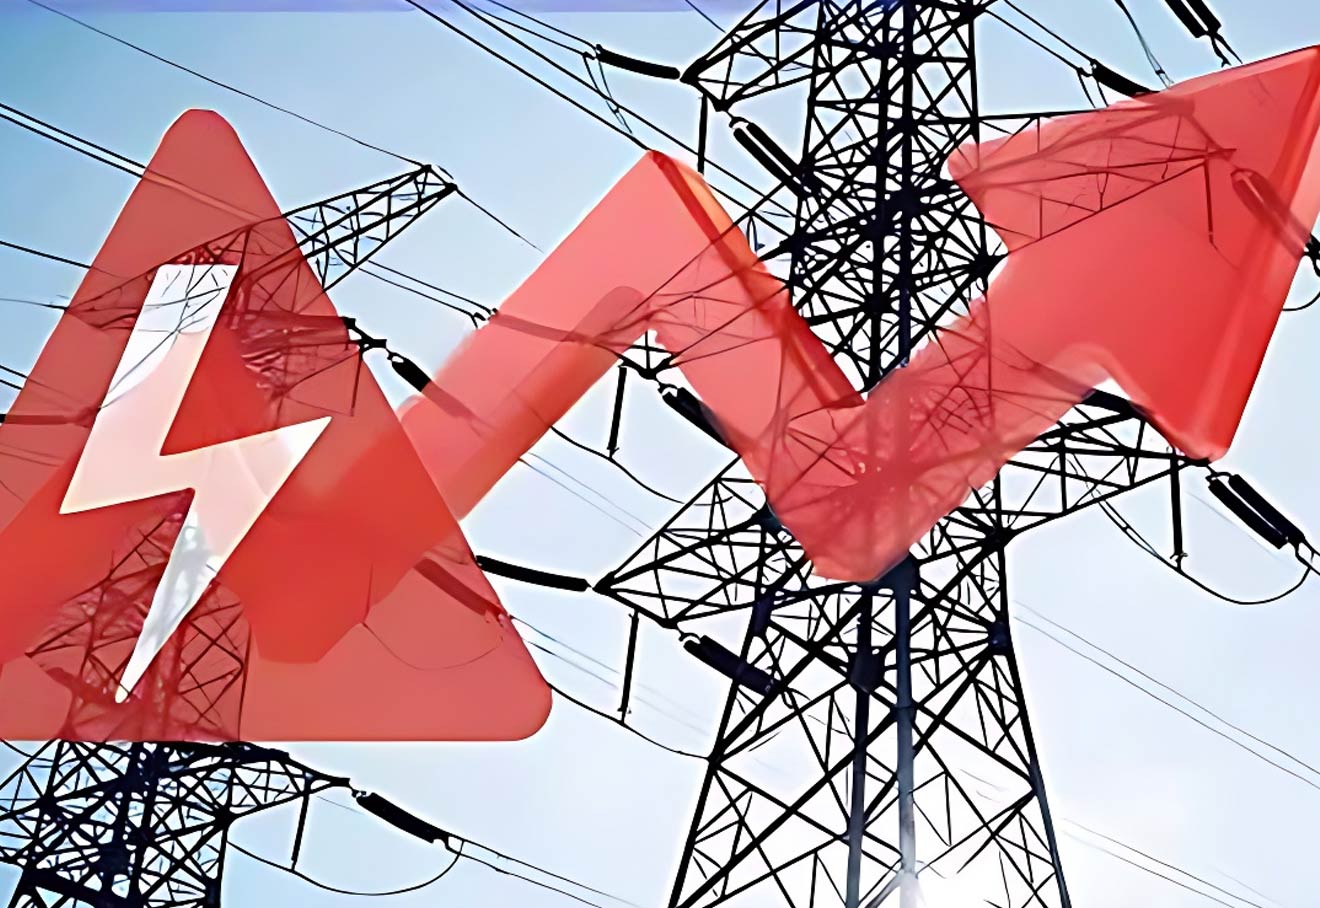 Industrial Associations In Himachal Urge Govt To Withdraw Hike In Power Tariff